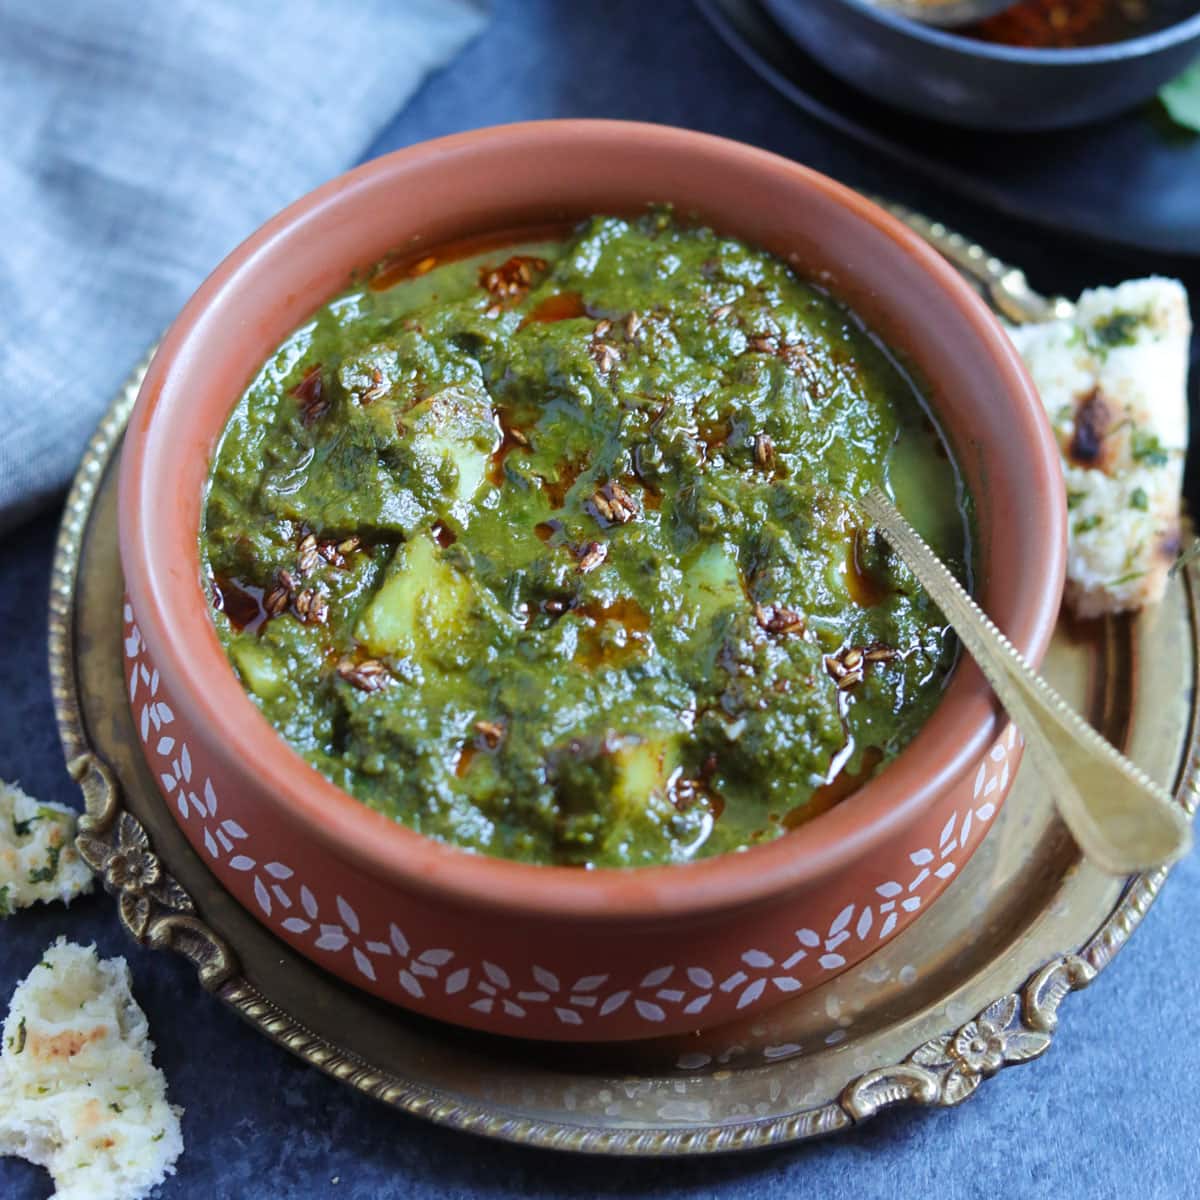 Saag aloo (spinach potato curry) in a bowl